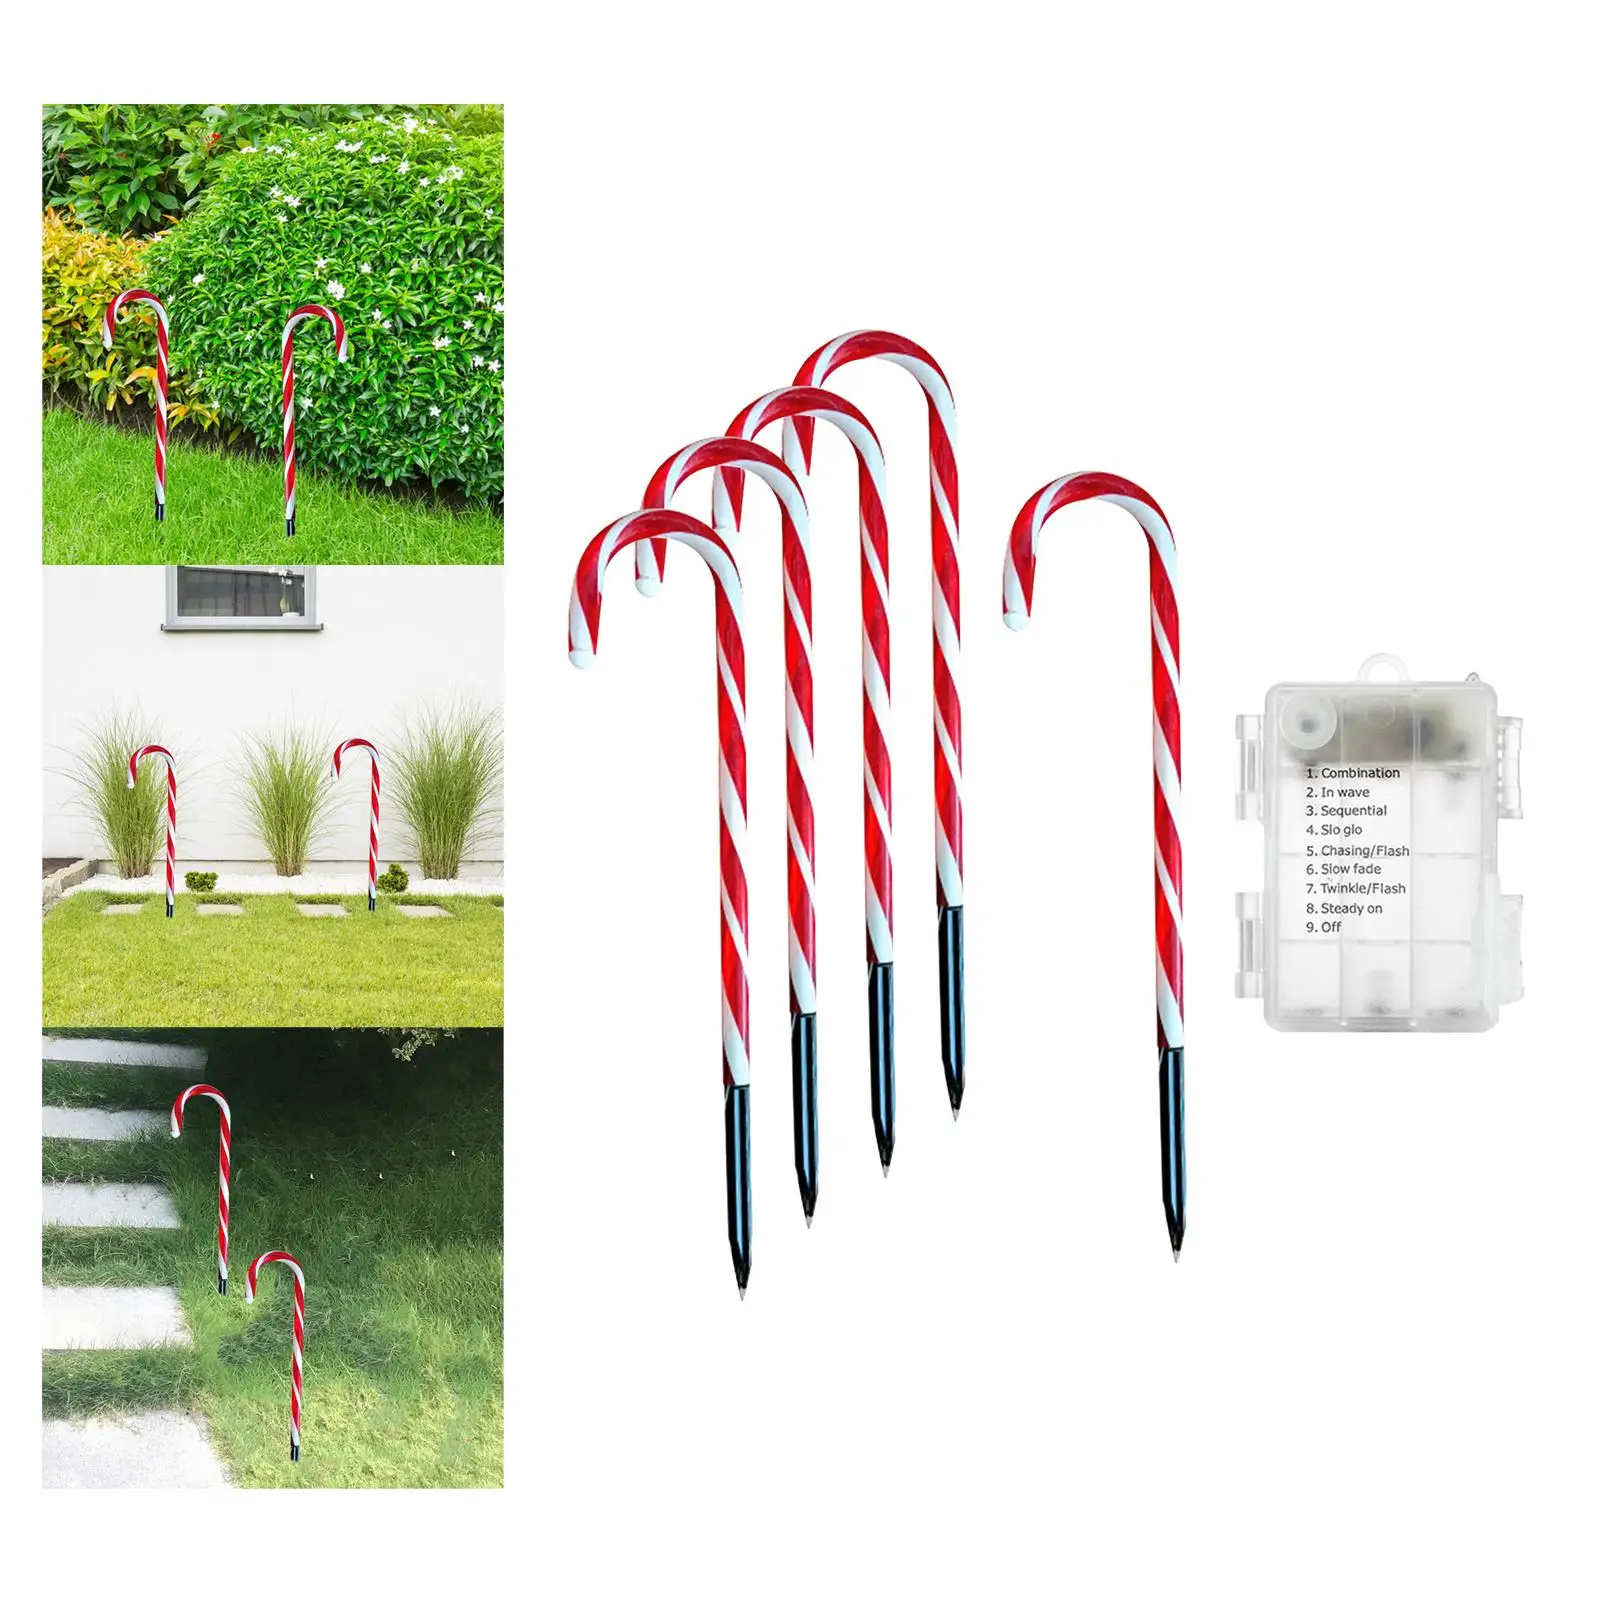 Christmas LED Lamps Decorations Crutch Light Pathway Waterproof Candy Cane Lights for Driveway Walkway Garden Yard Outdoor